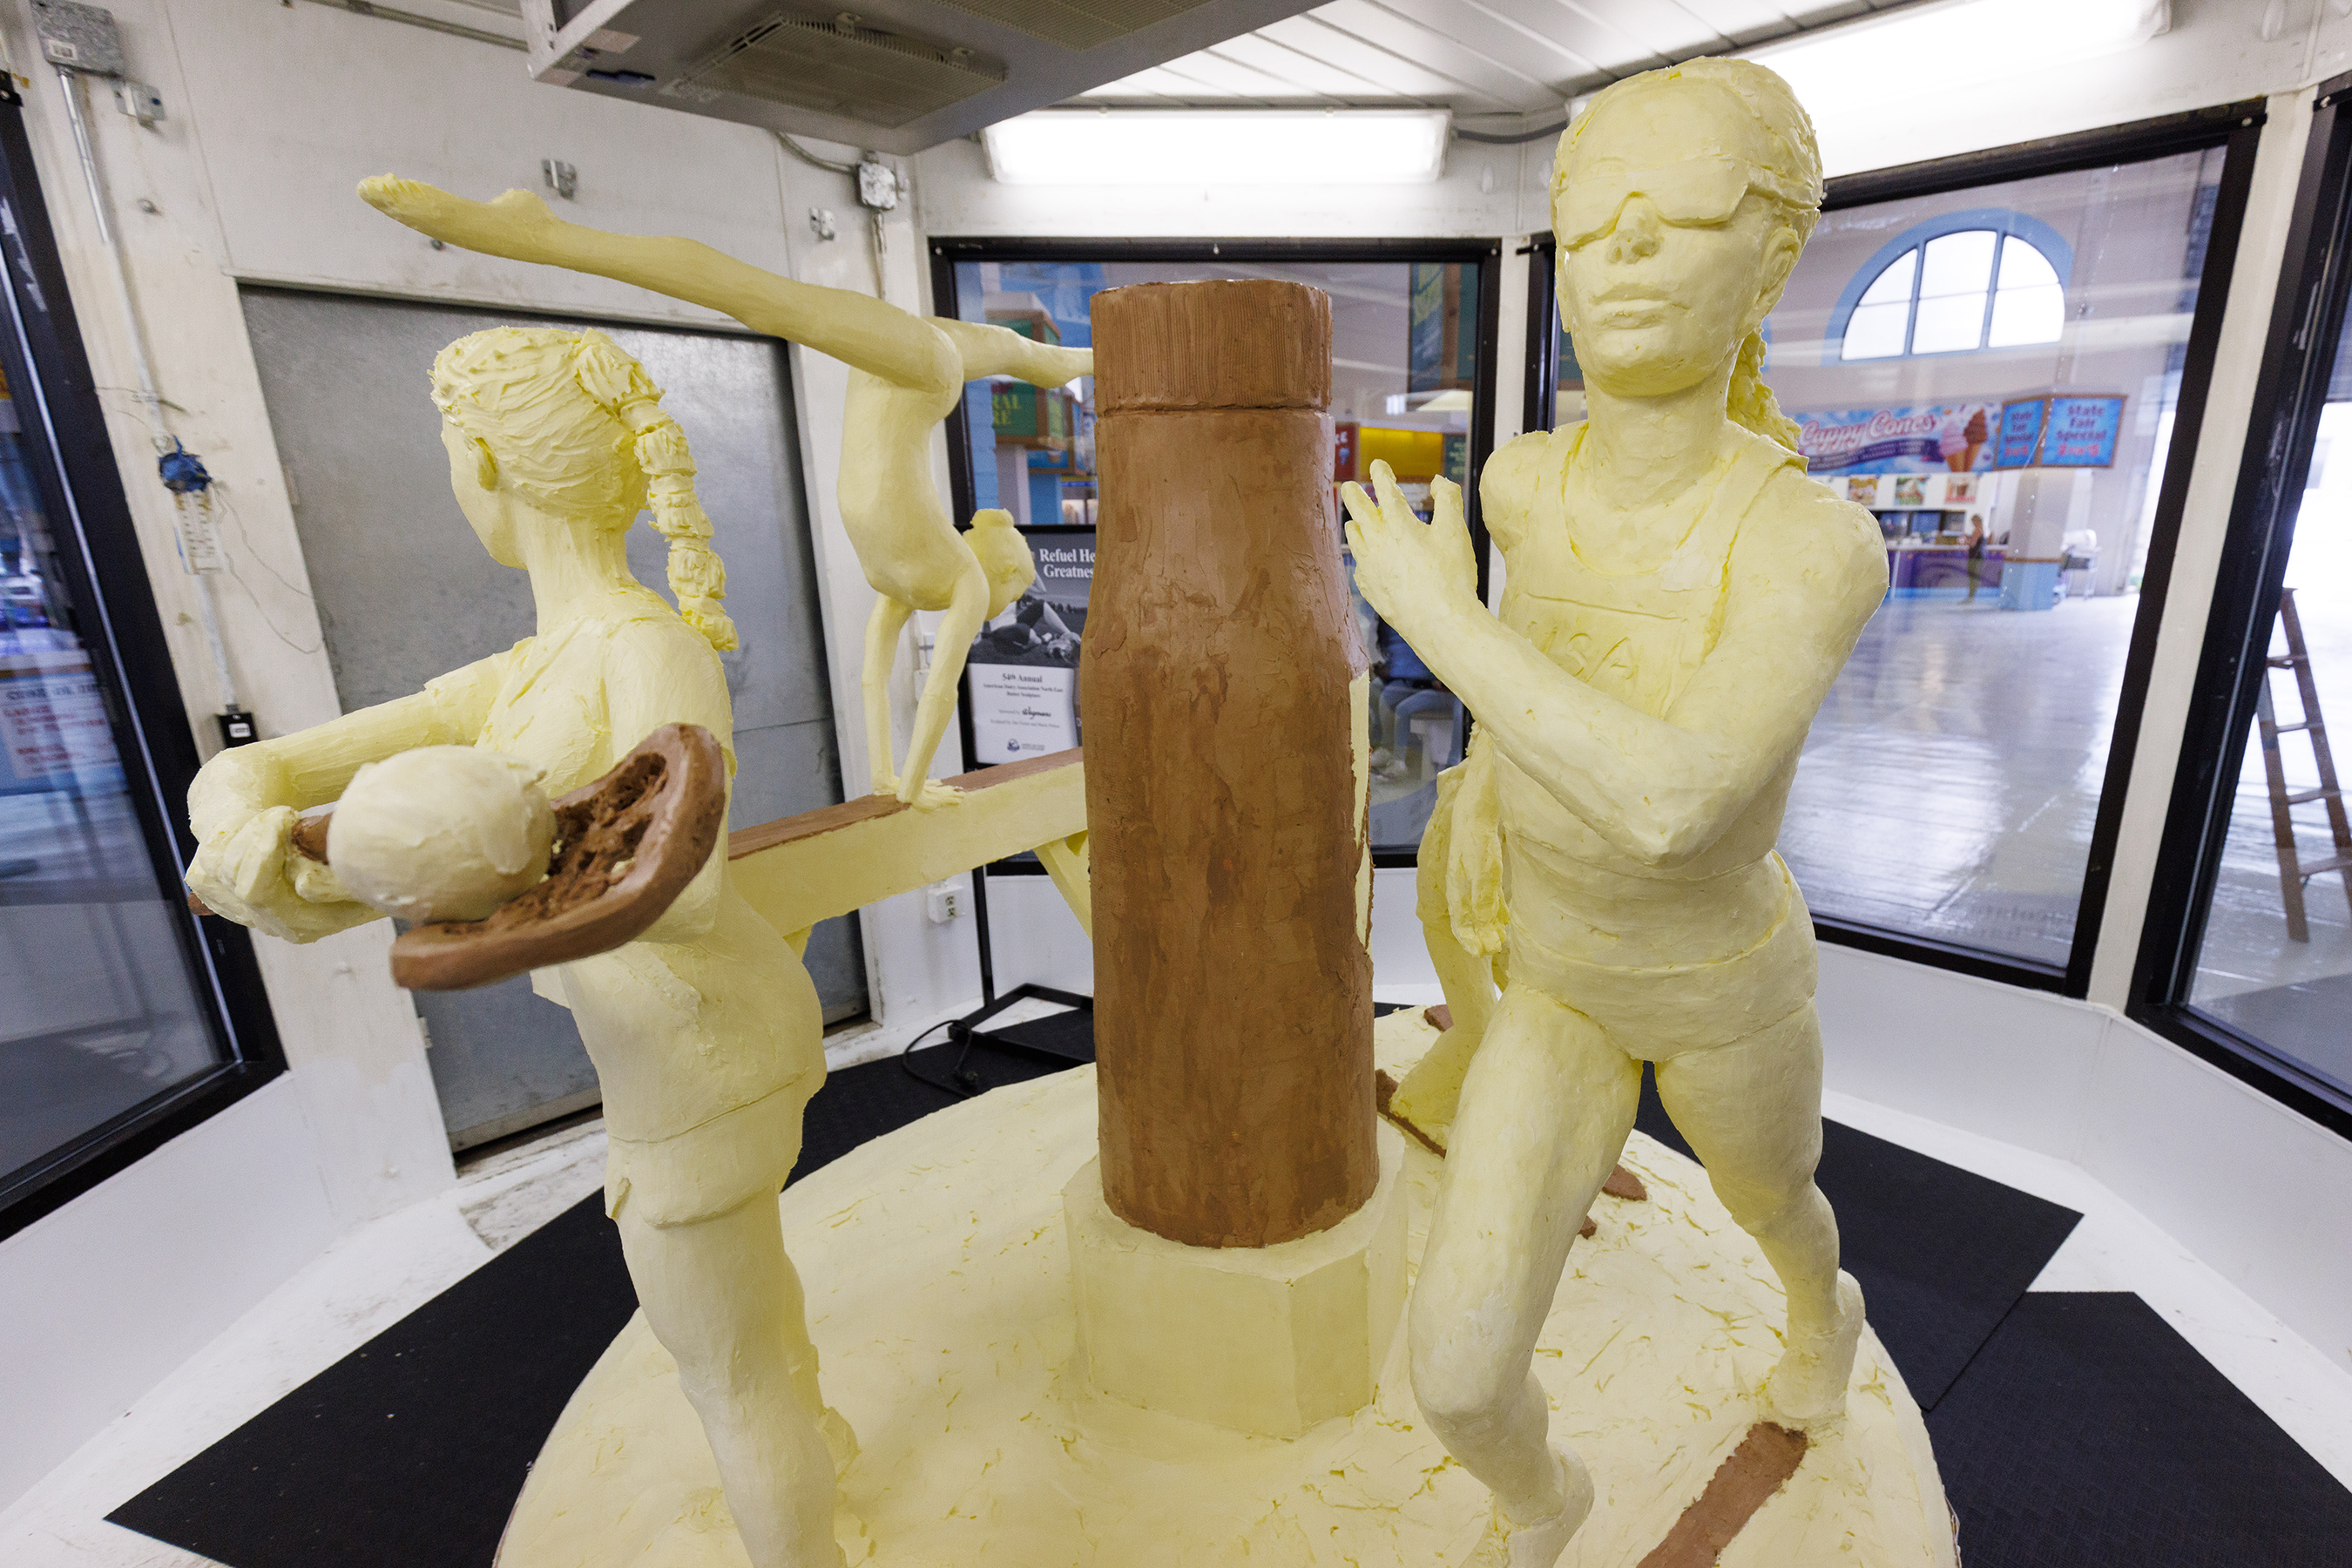 American Dairy Association North East unveiled the 54th Annual Butter Sculpture at the New York State Fair on August 23, 2022, titled Refuel Her Greatness – Celebrating the 50th Anniversary of Title IX. The sculpture spotlights female athletes and how today’s athletes refuel with chocolate milk and features a progression of female athletes ranging in age from a child skier to a high school-aged gymnast to a college lacrosse player to an adult runner.